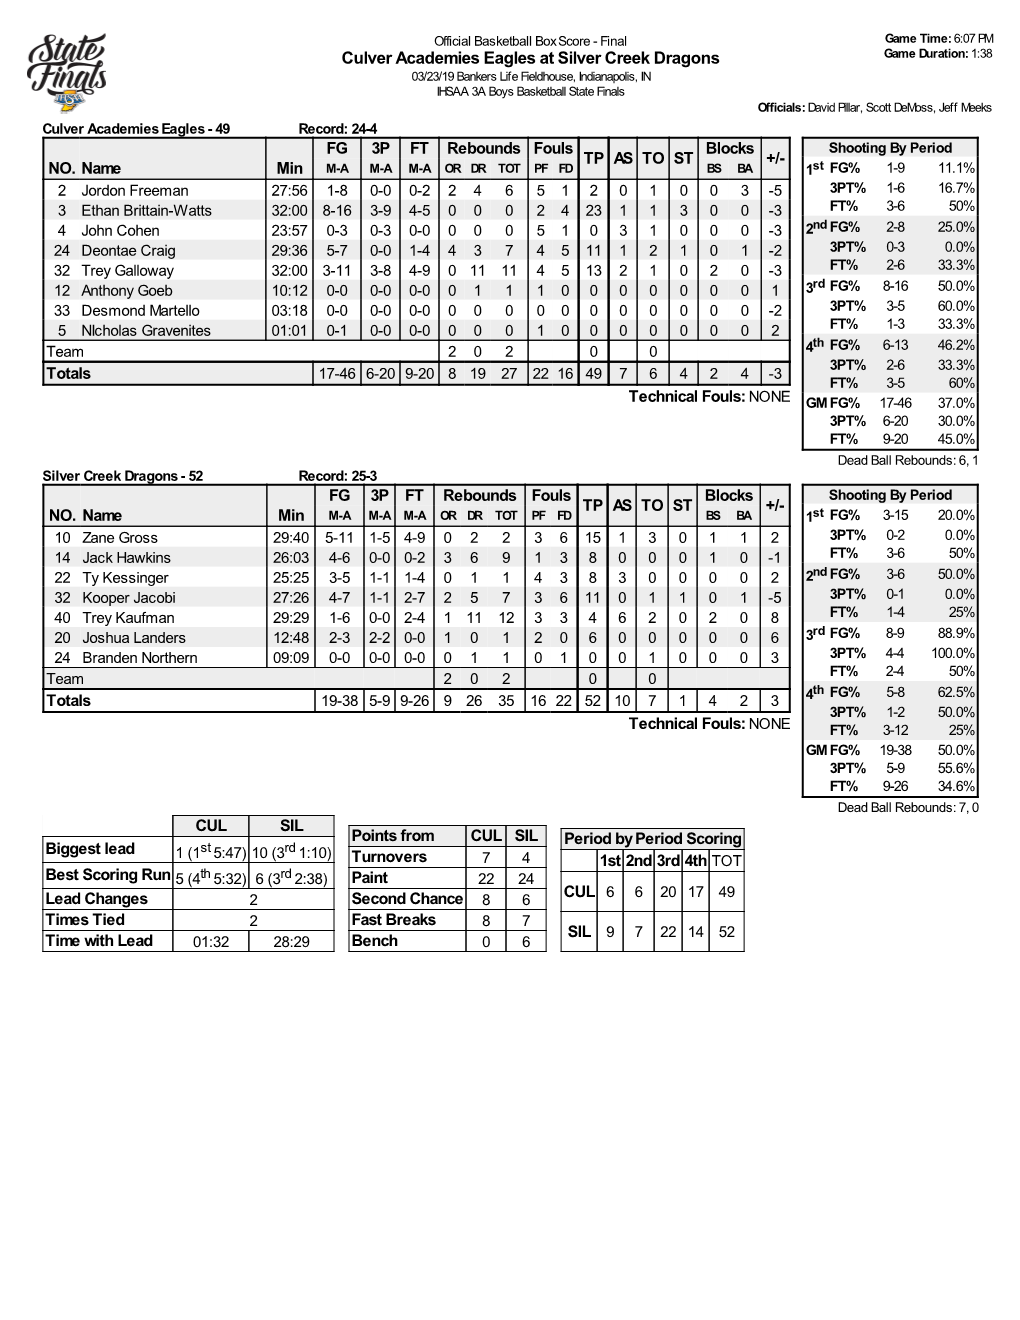 Box Score - Final Game Time: 6:07 PM Culver Academies Eagles at Silver Creek Dragons Game Duration: 1:38